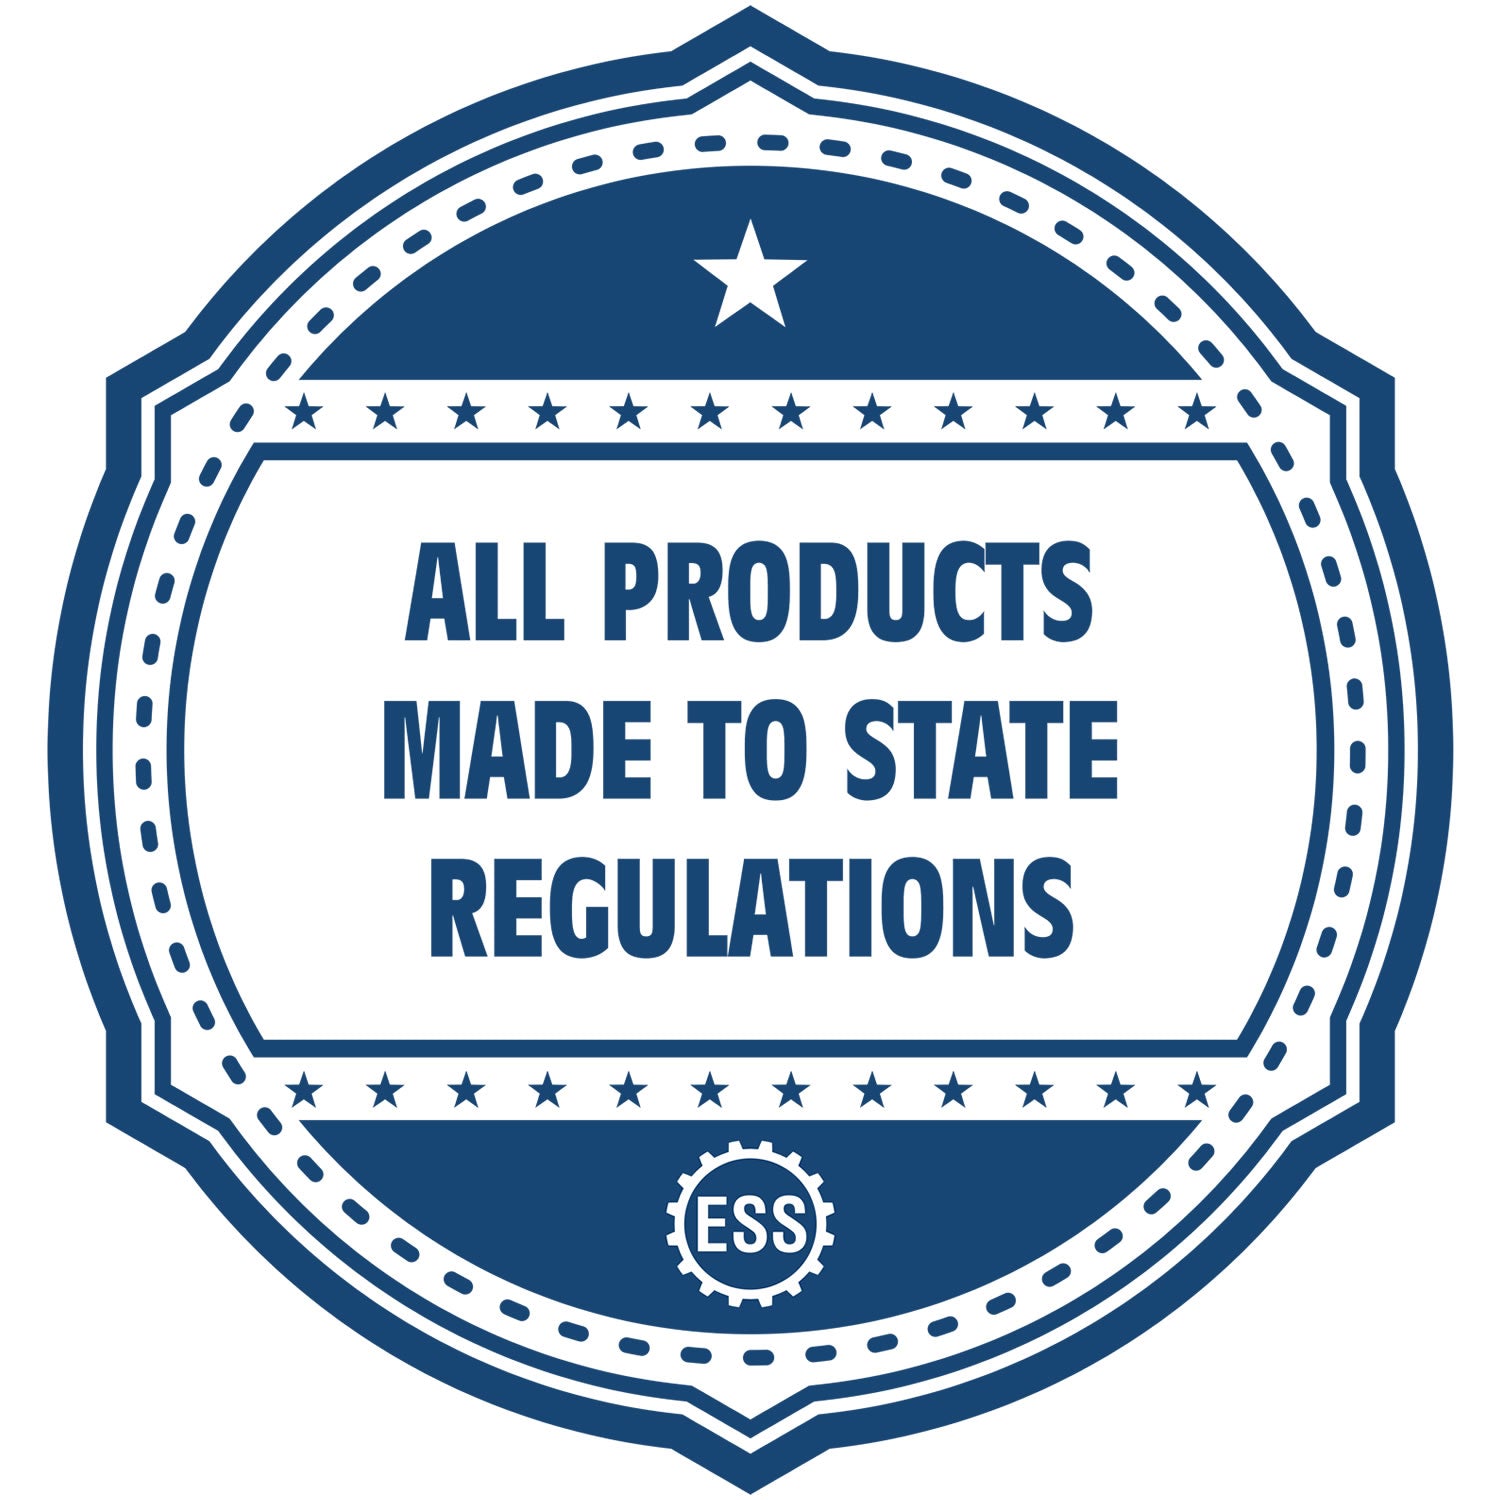 An icon or badge element for the Oregon Engineer Desk Seal showing that this product is made in compliance with state regulations.